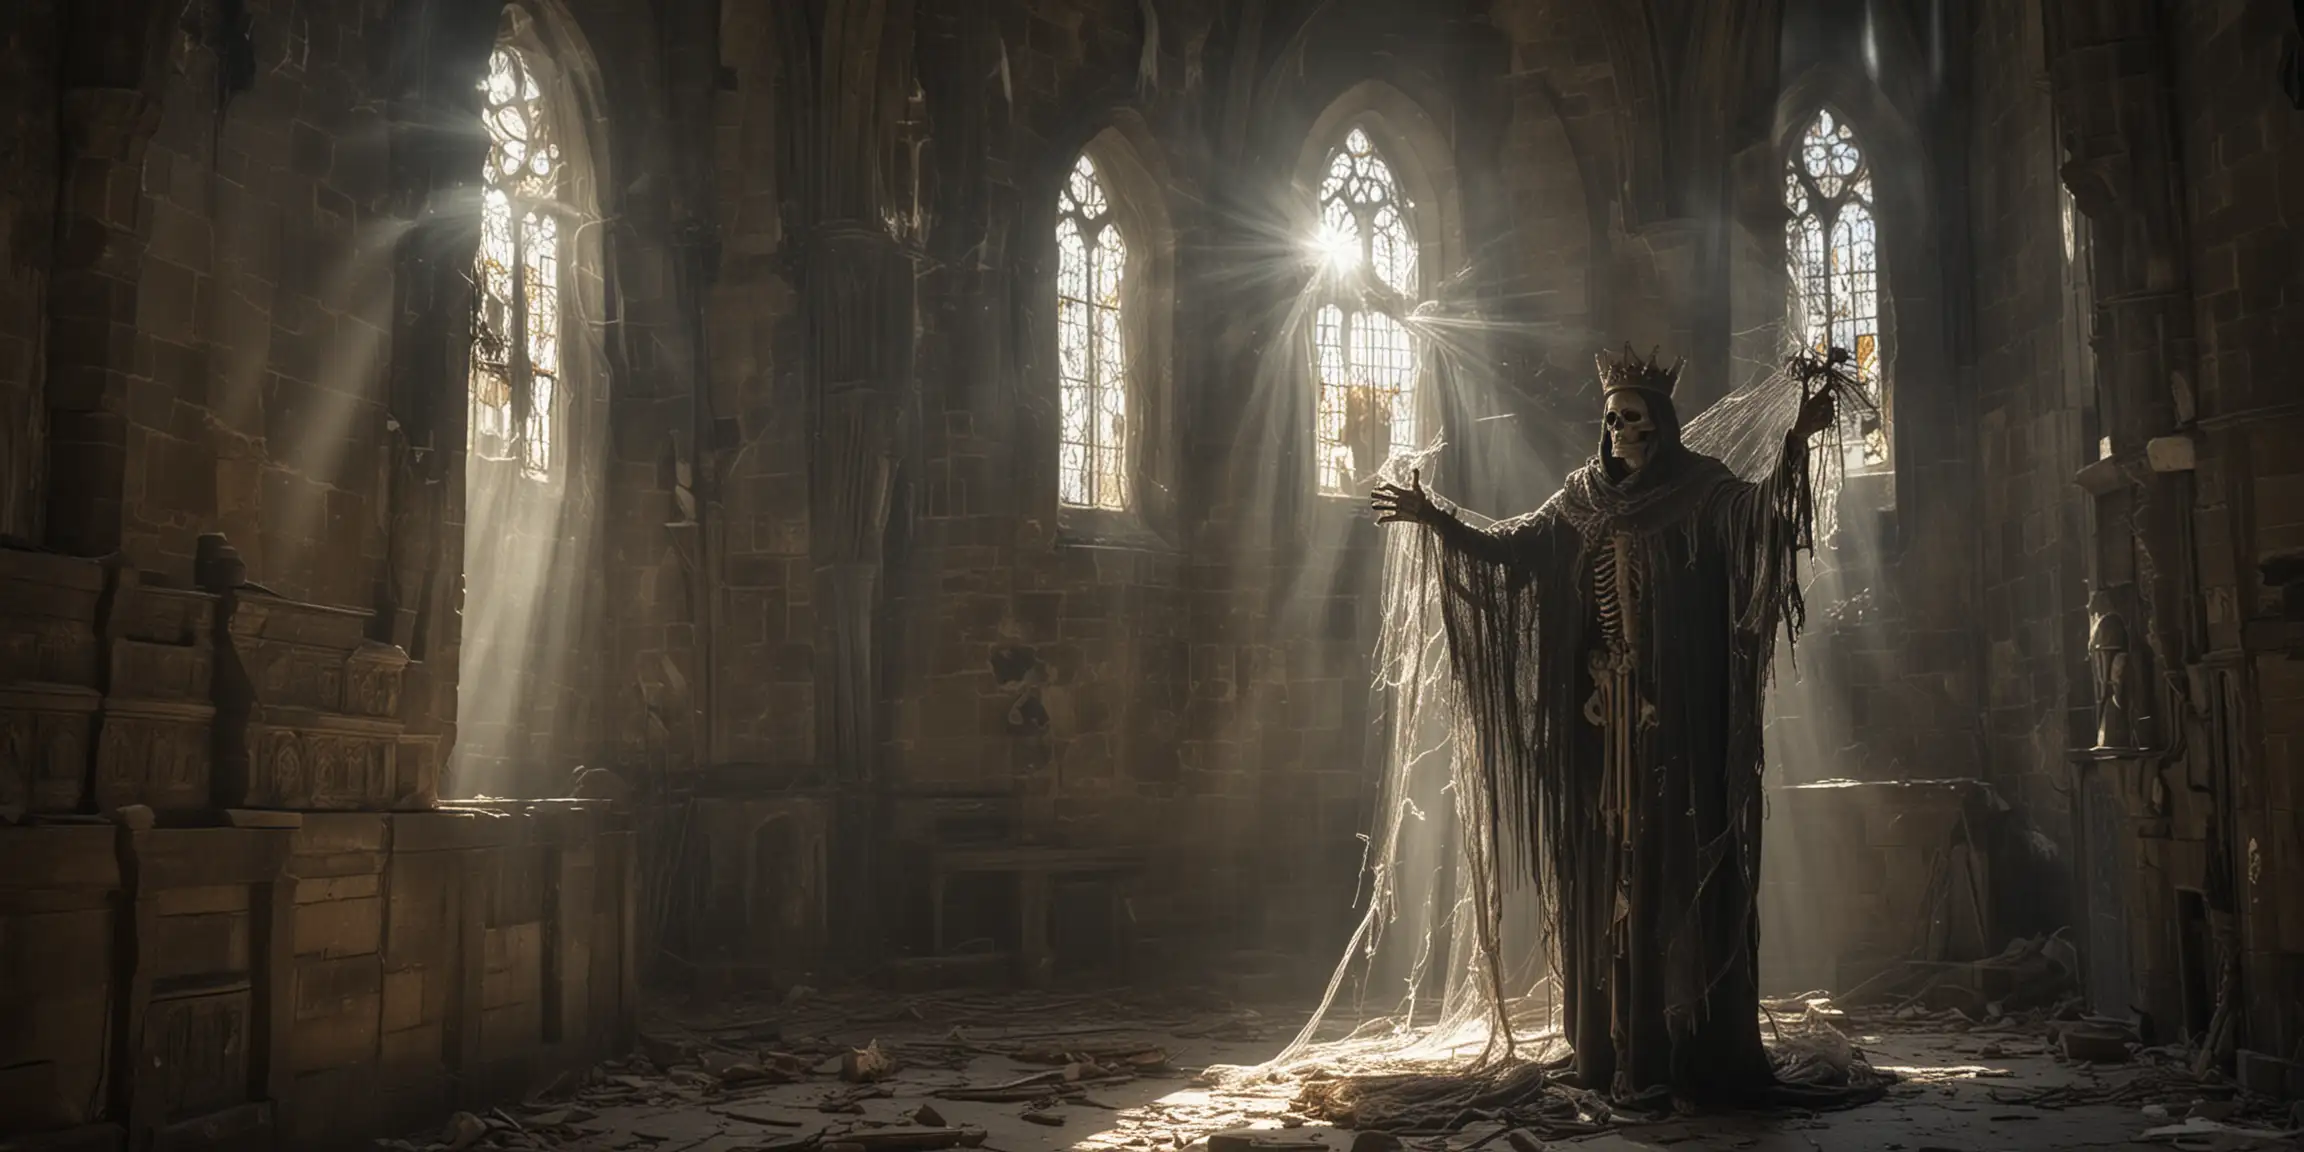 Ancient Skeleton King Emerges in Sunlit Church Ruins